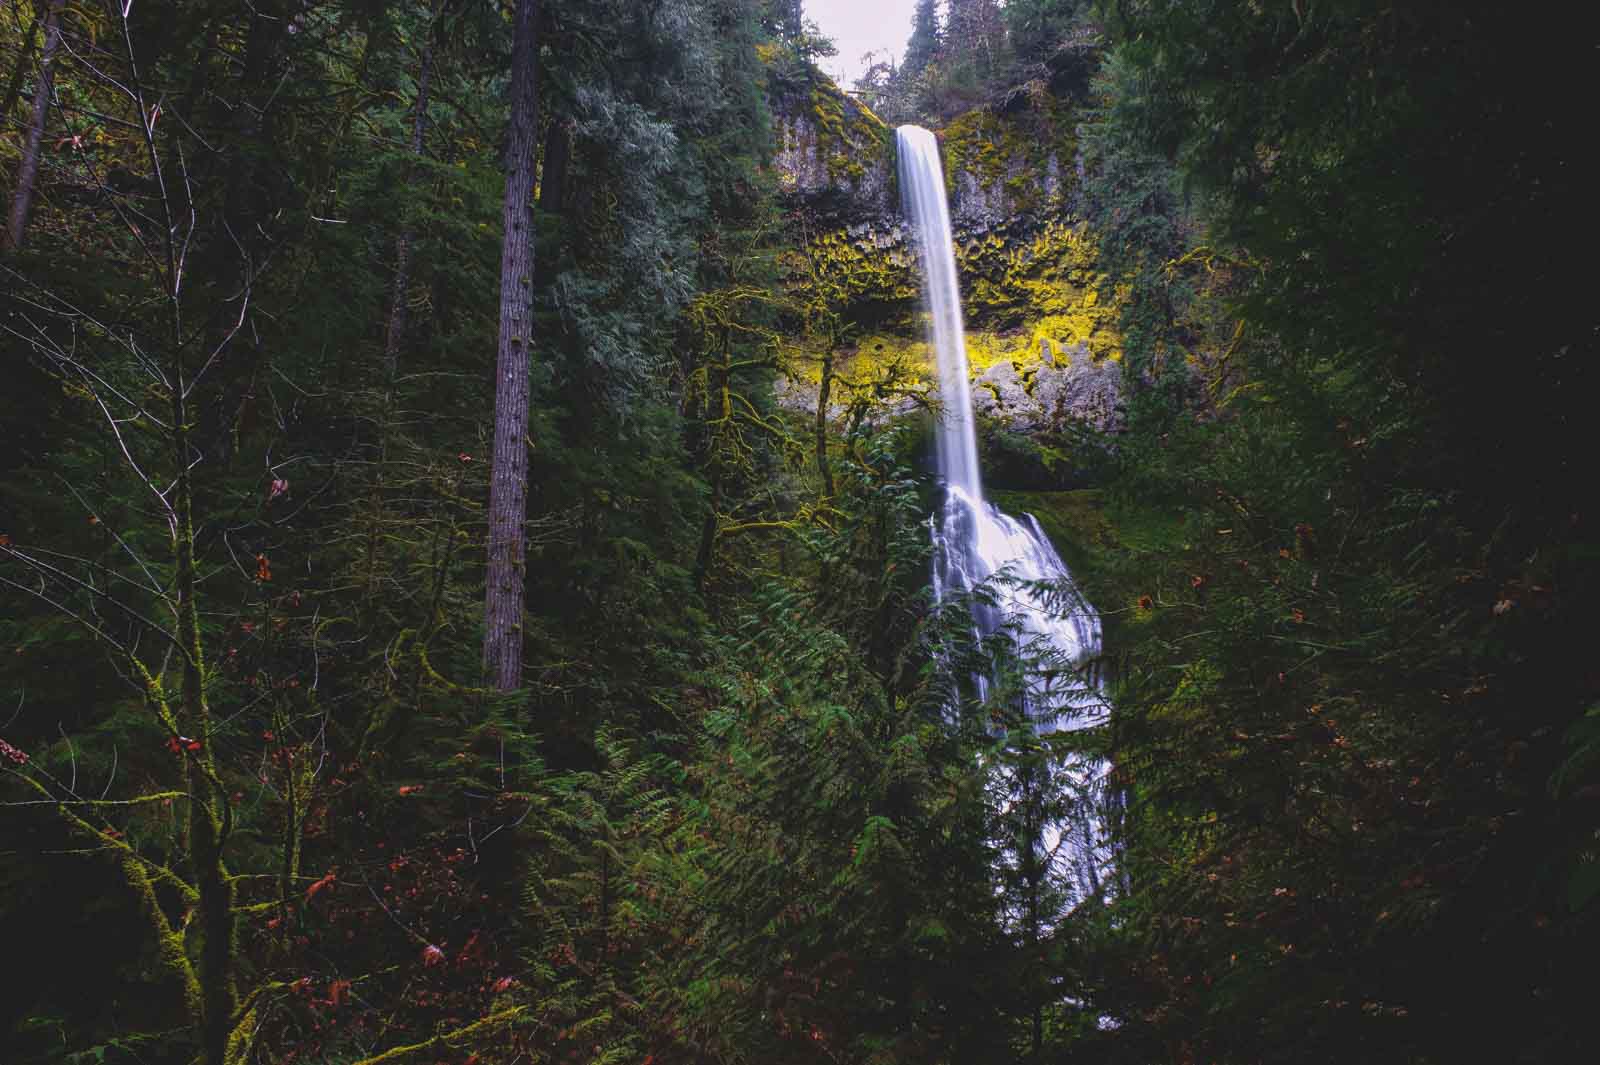 Pup Creek Falls is another notable Oregon waterfall.